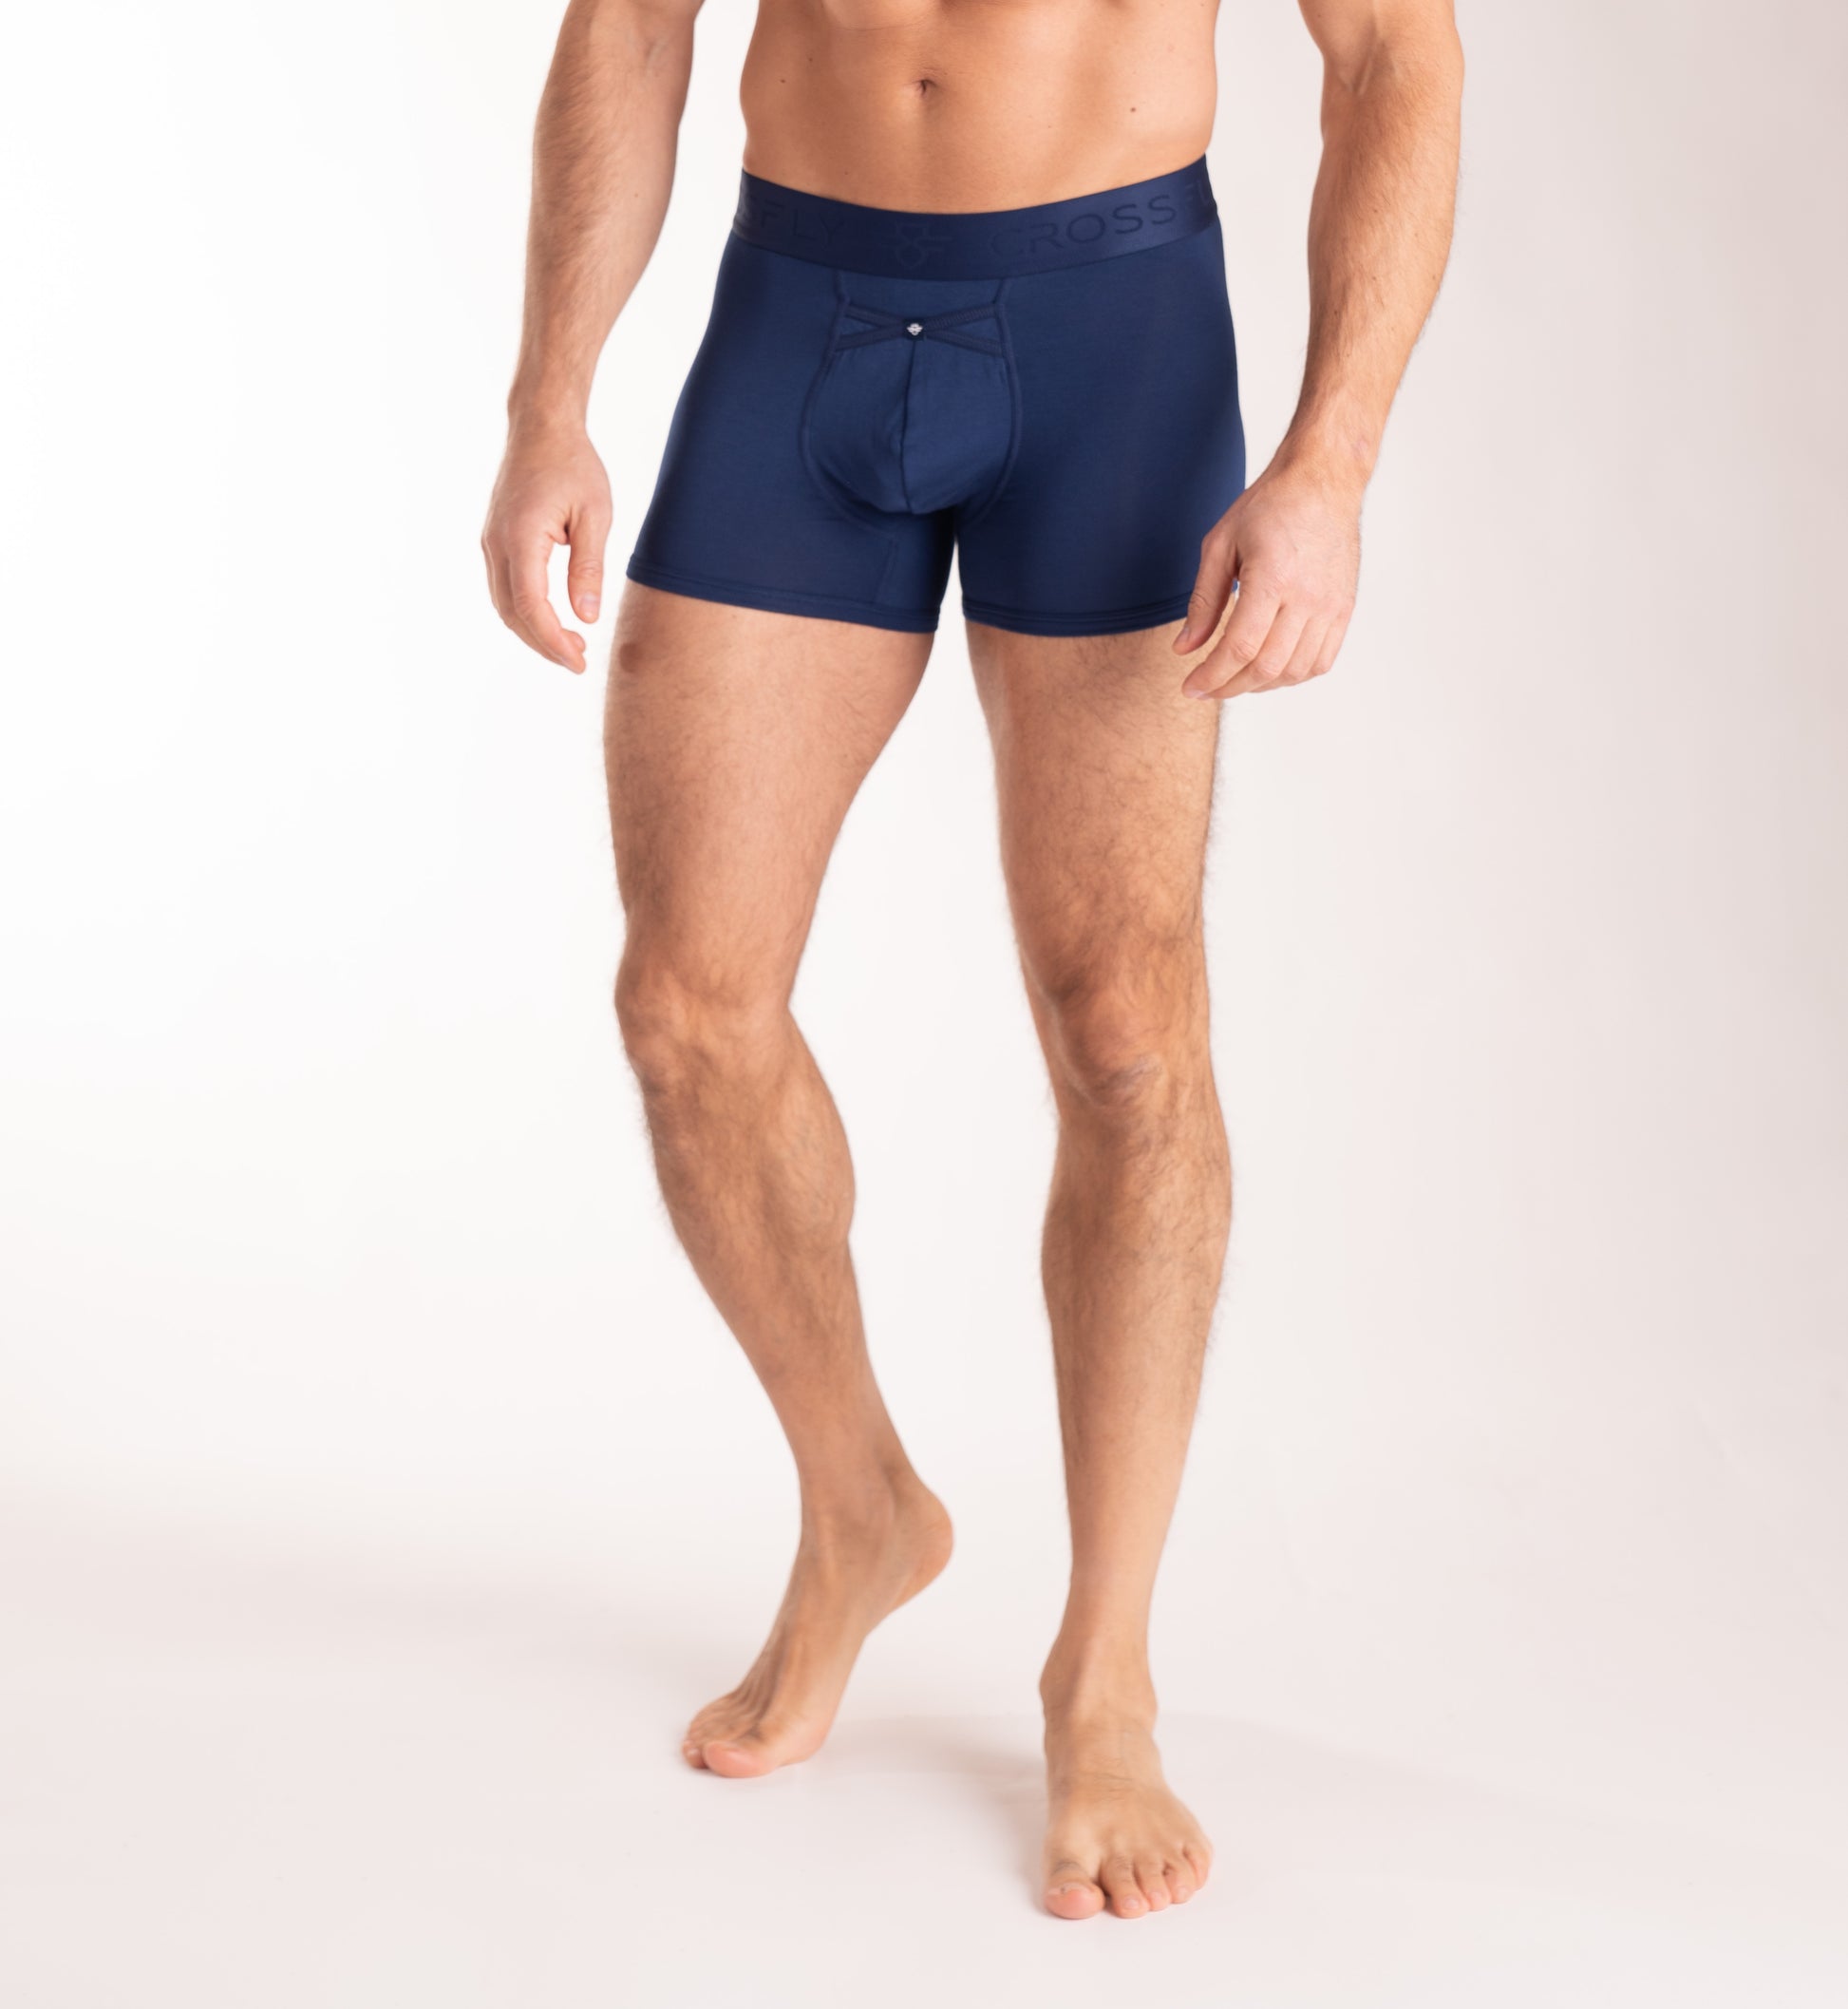 Crossfly men's IKON 3" navy trunks from the Everyday series, featuring X-Fly and Coccoon internal pocket support.